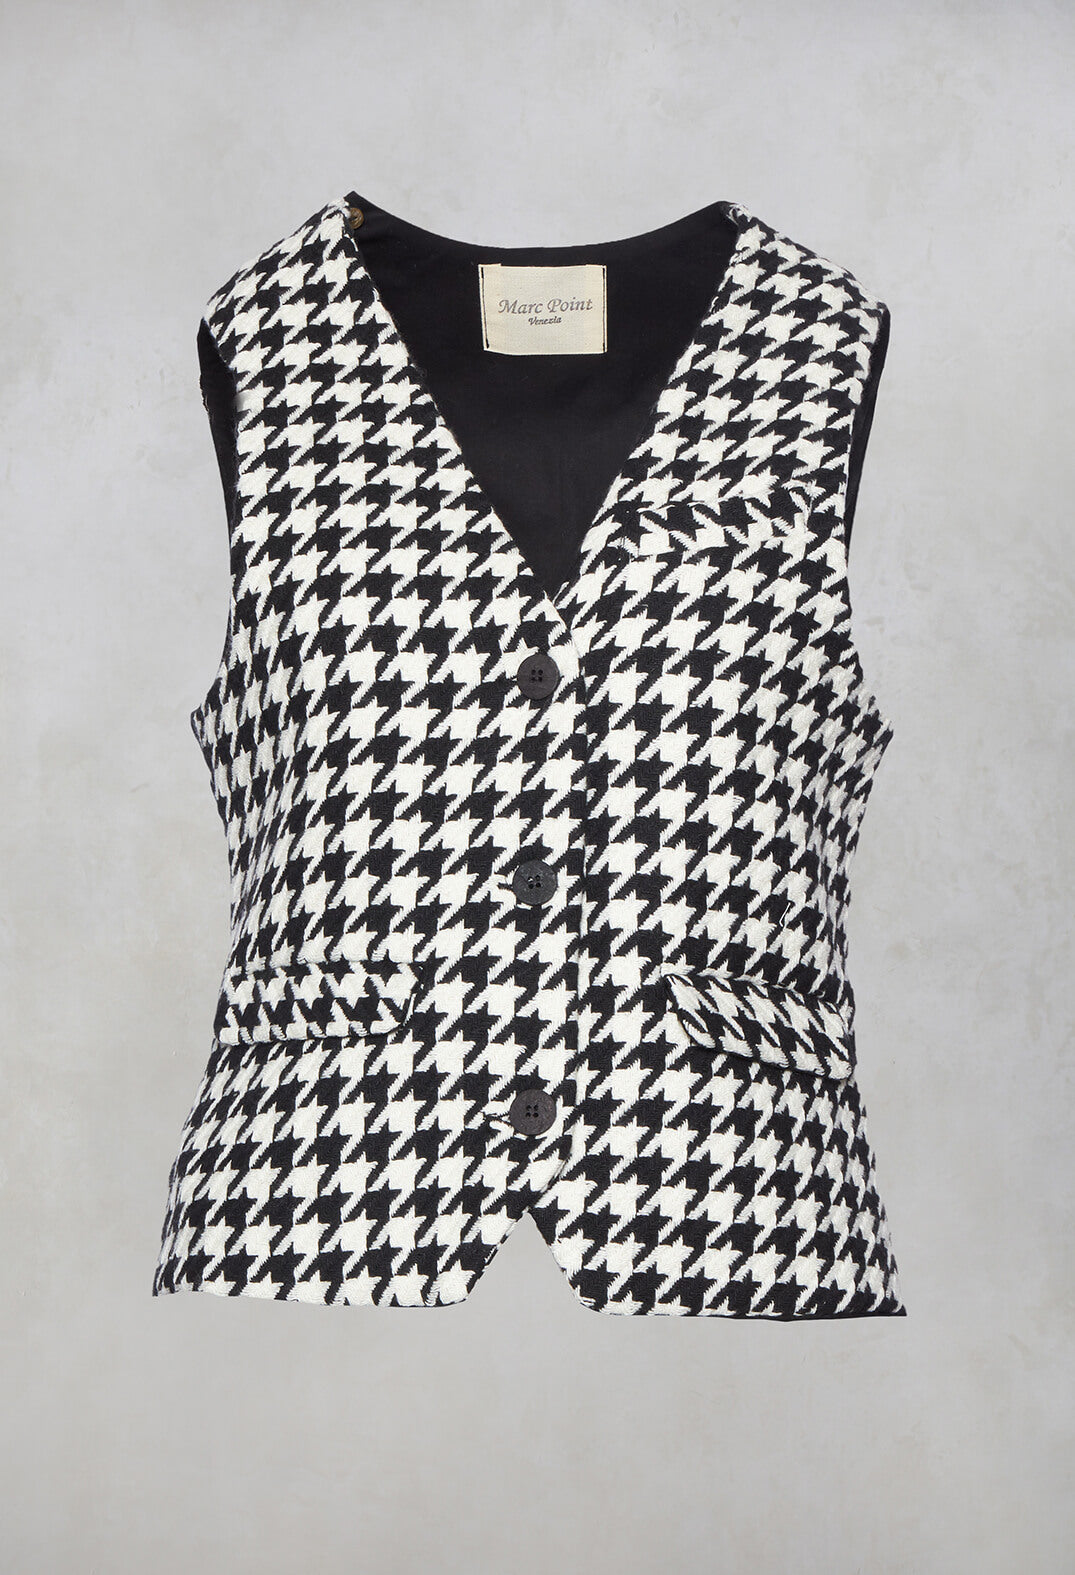 Hounds Tooth Printed Waistcoat in 1000